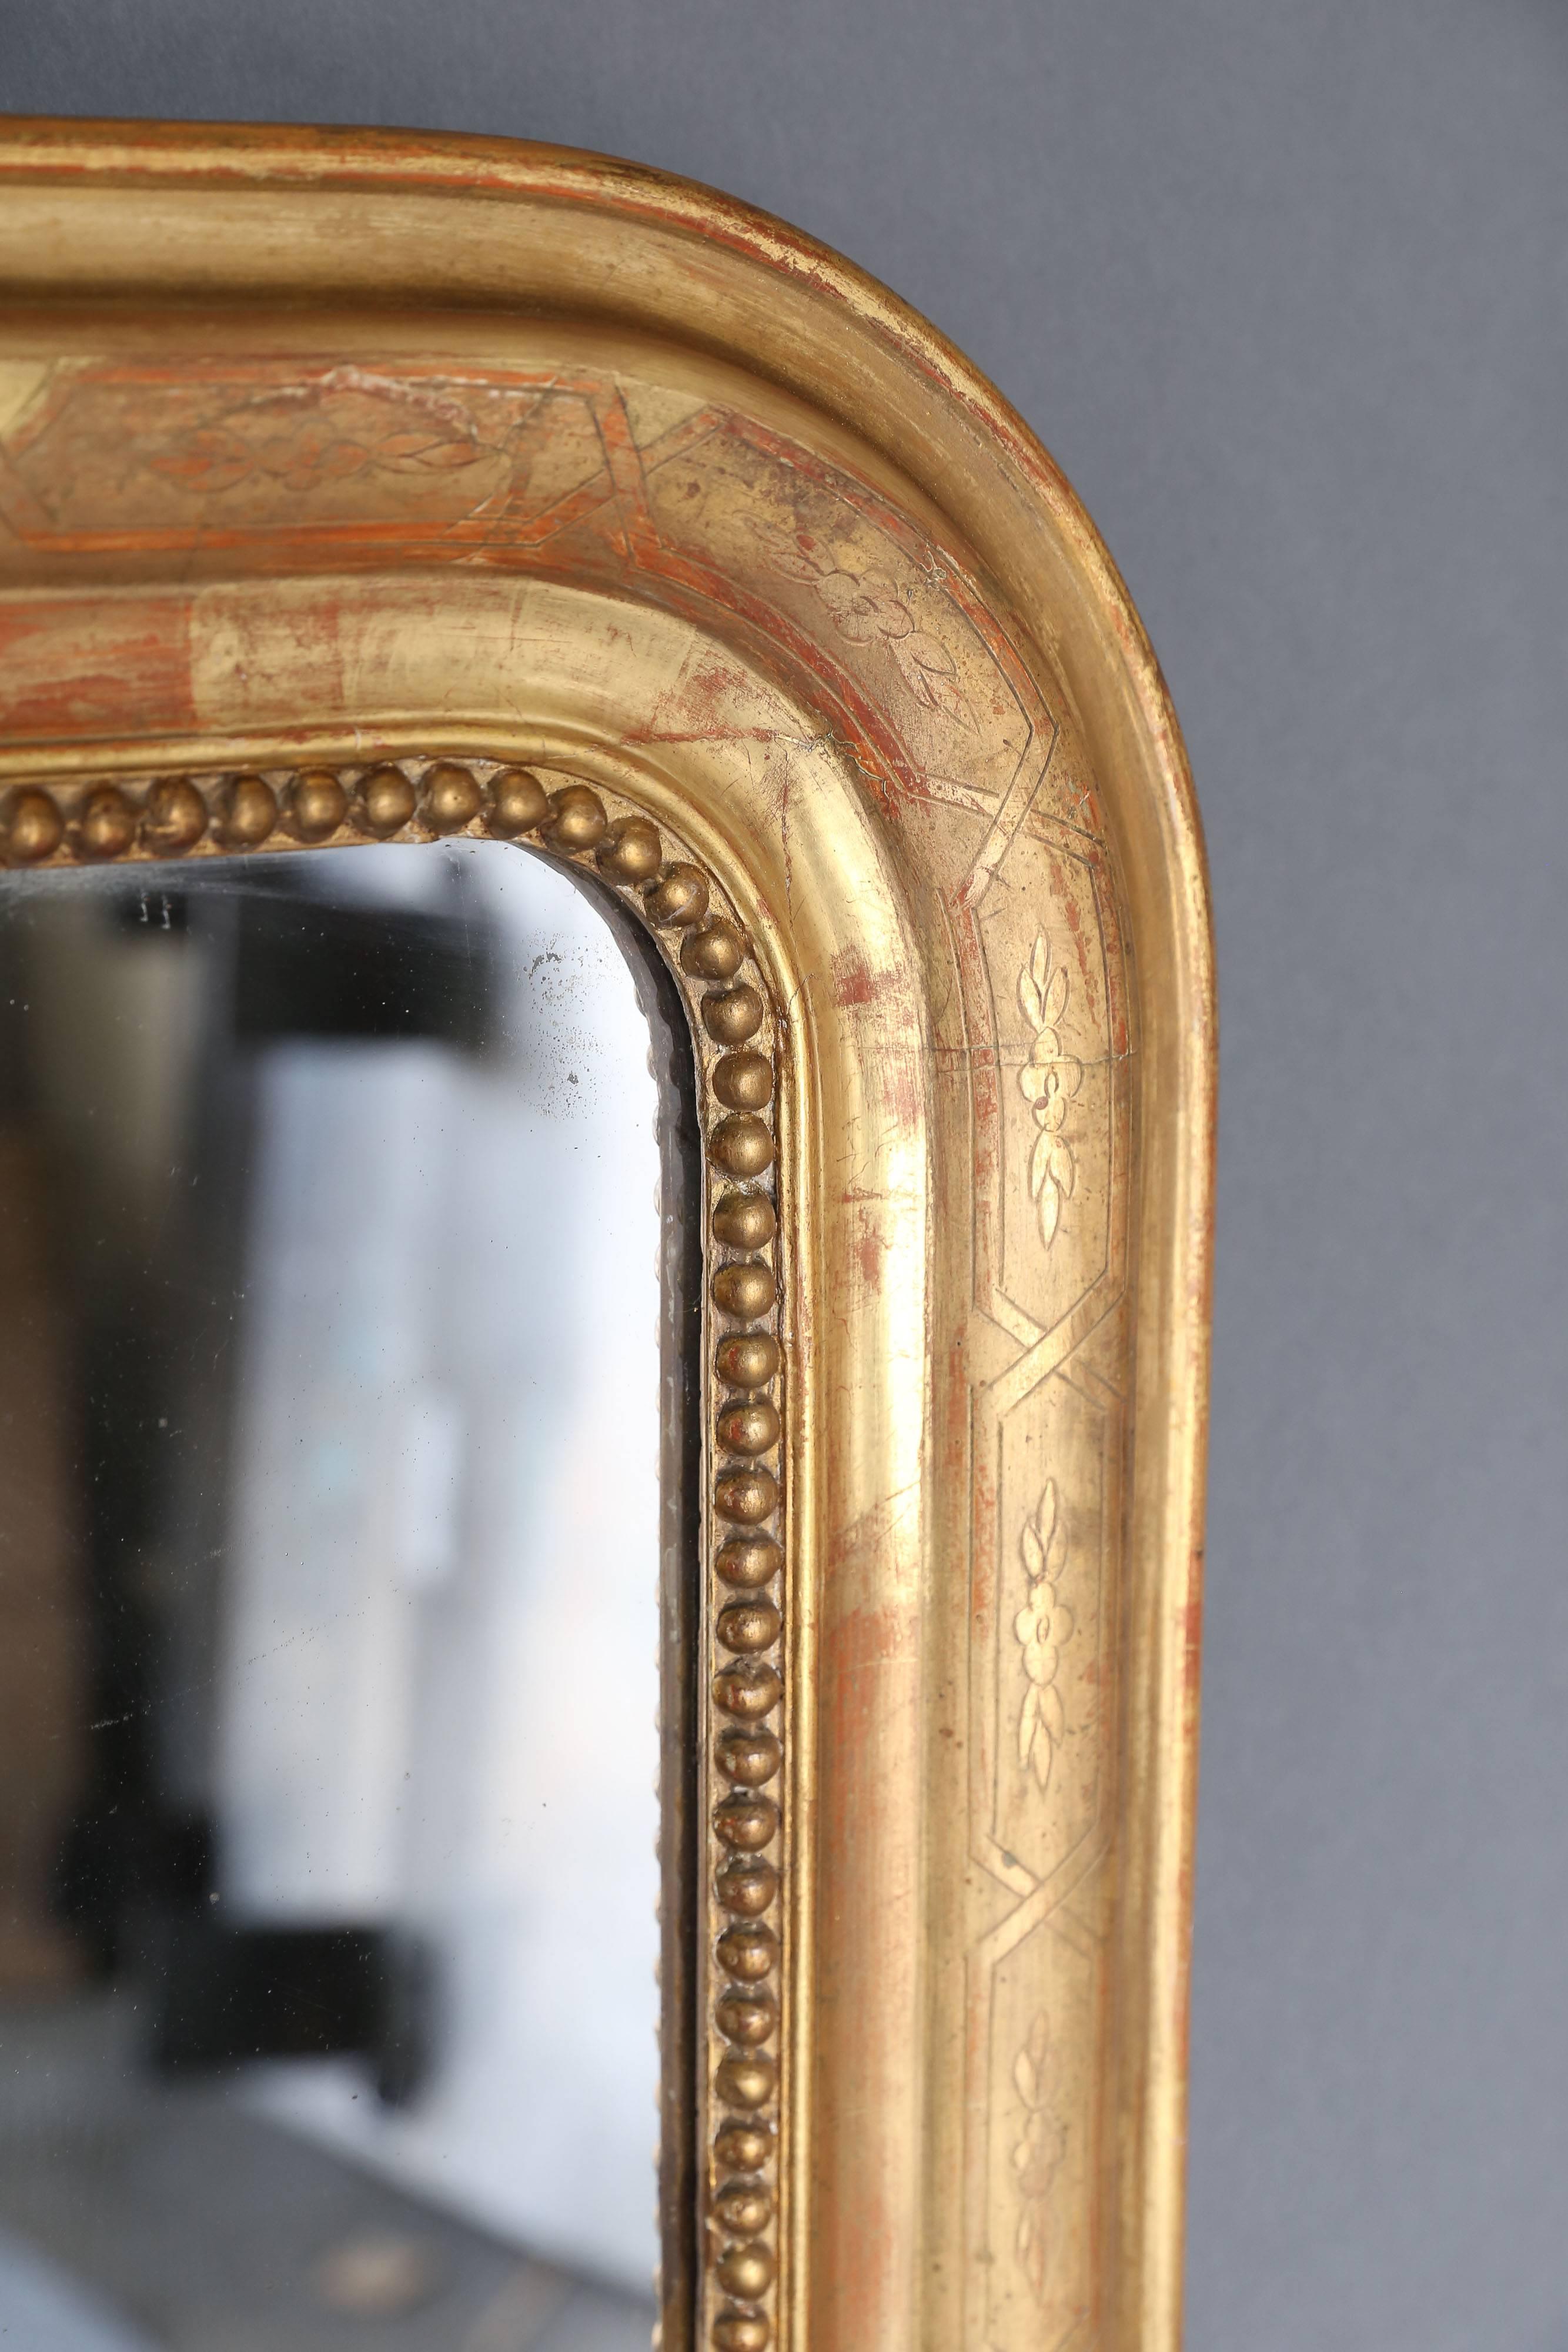 19th century Louis Philippe gilt mirror with pearl detail on the interior perimeter. Etching on gilt is an intertwining design with simple floral motifs throughout. Mercury glass is original.